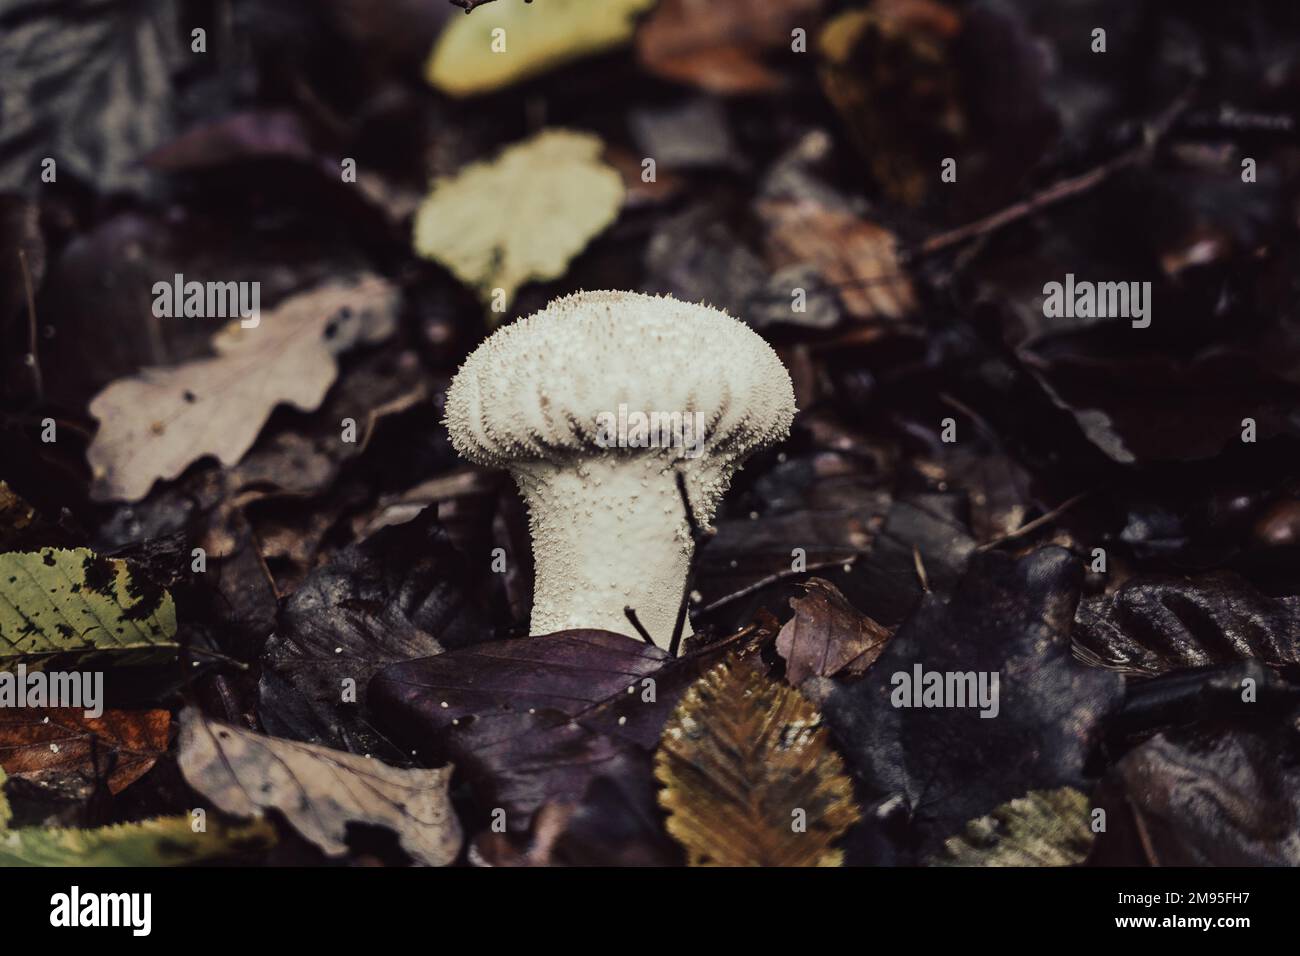 A close-up of a Prickly raincoat (Lycoperdon perlatum) mushroom in a forest under the leaves Stock Photo